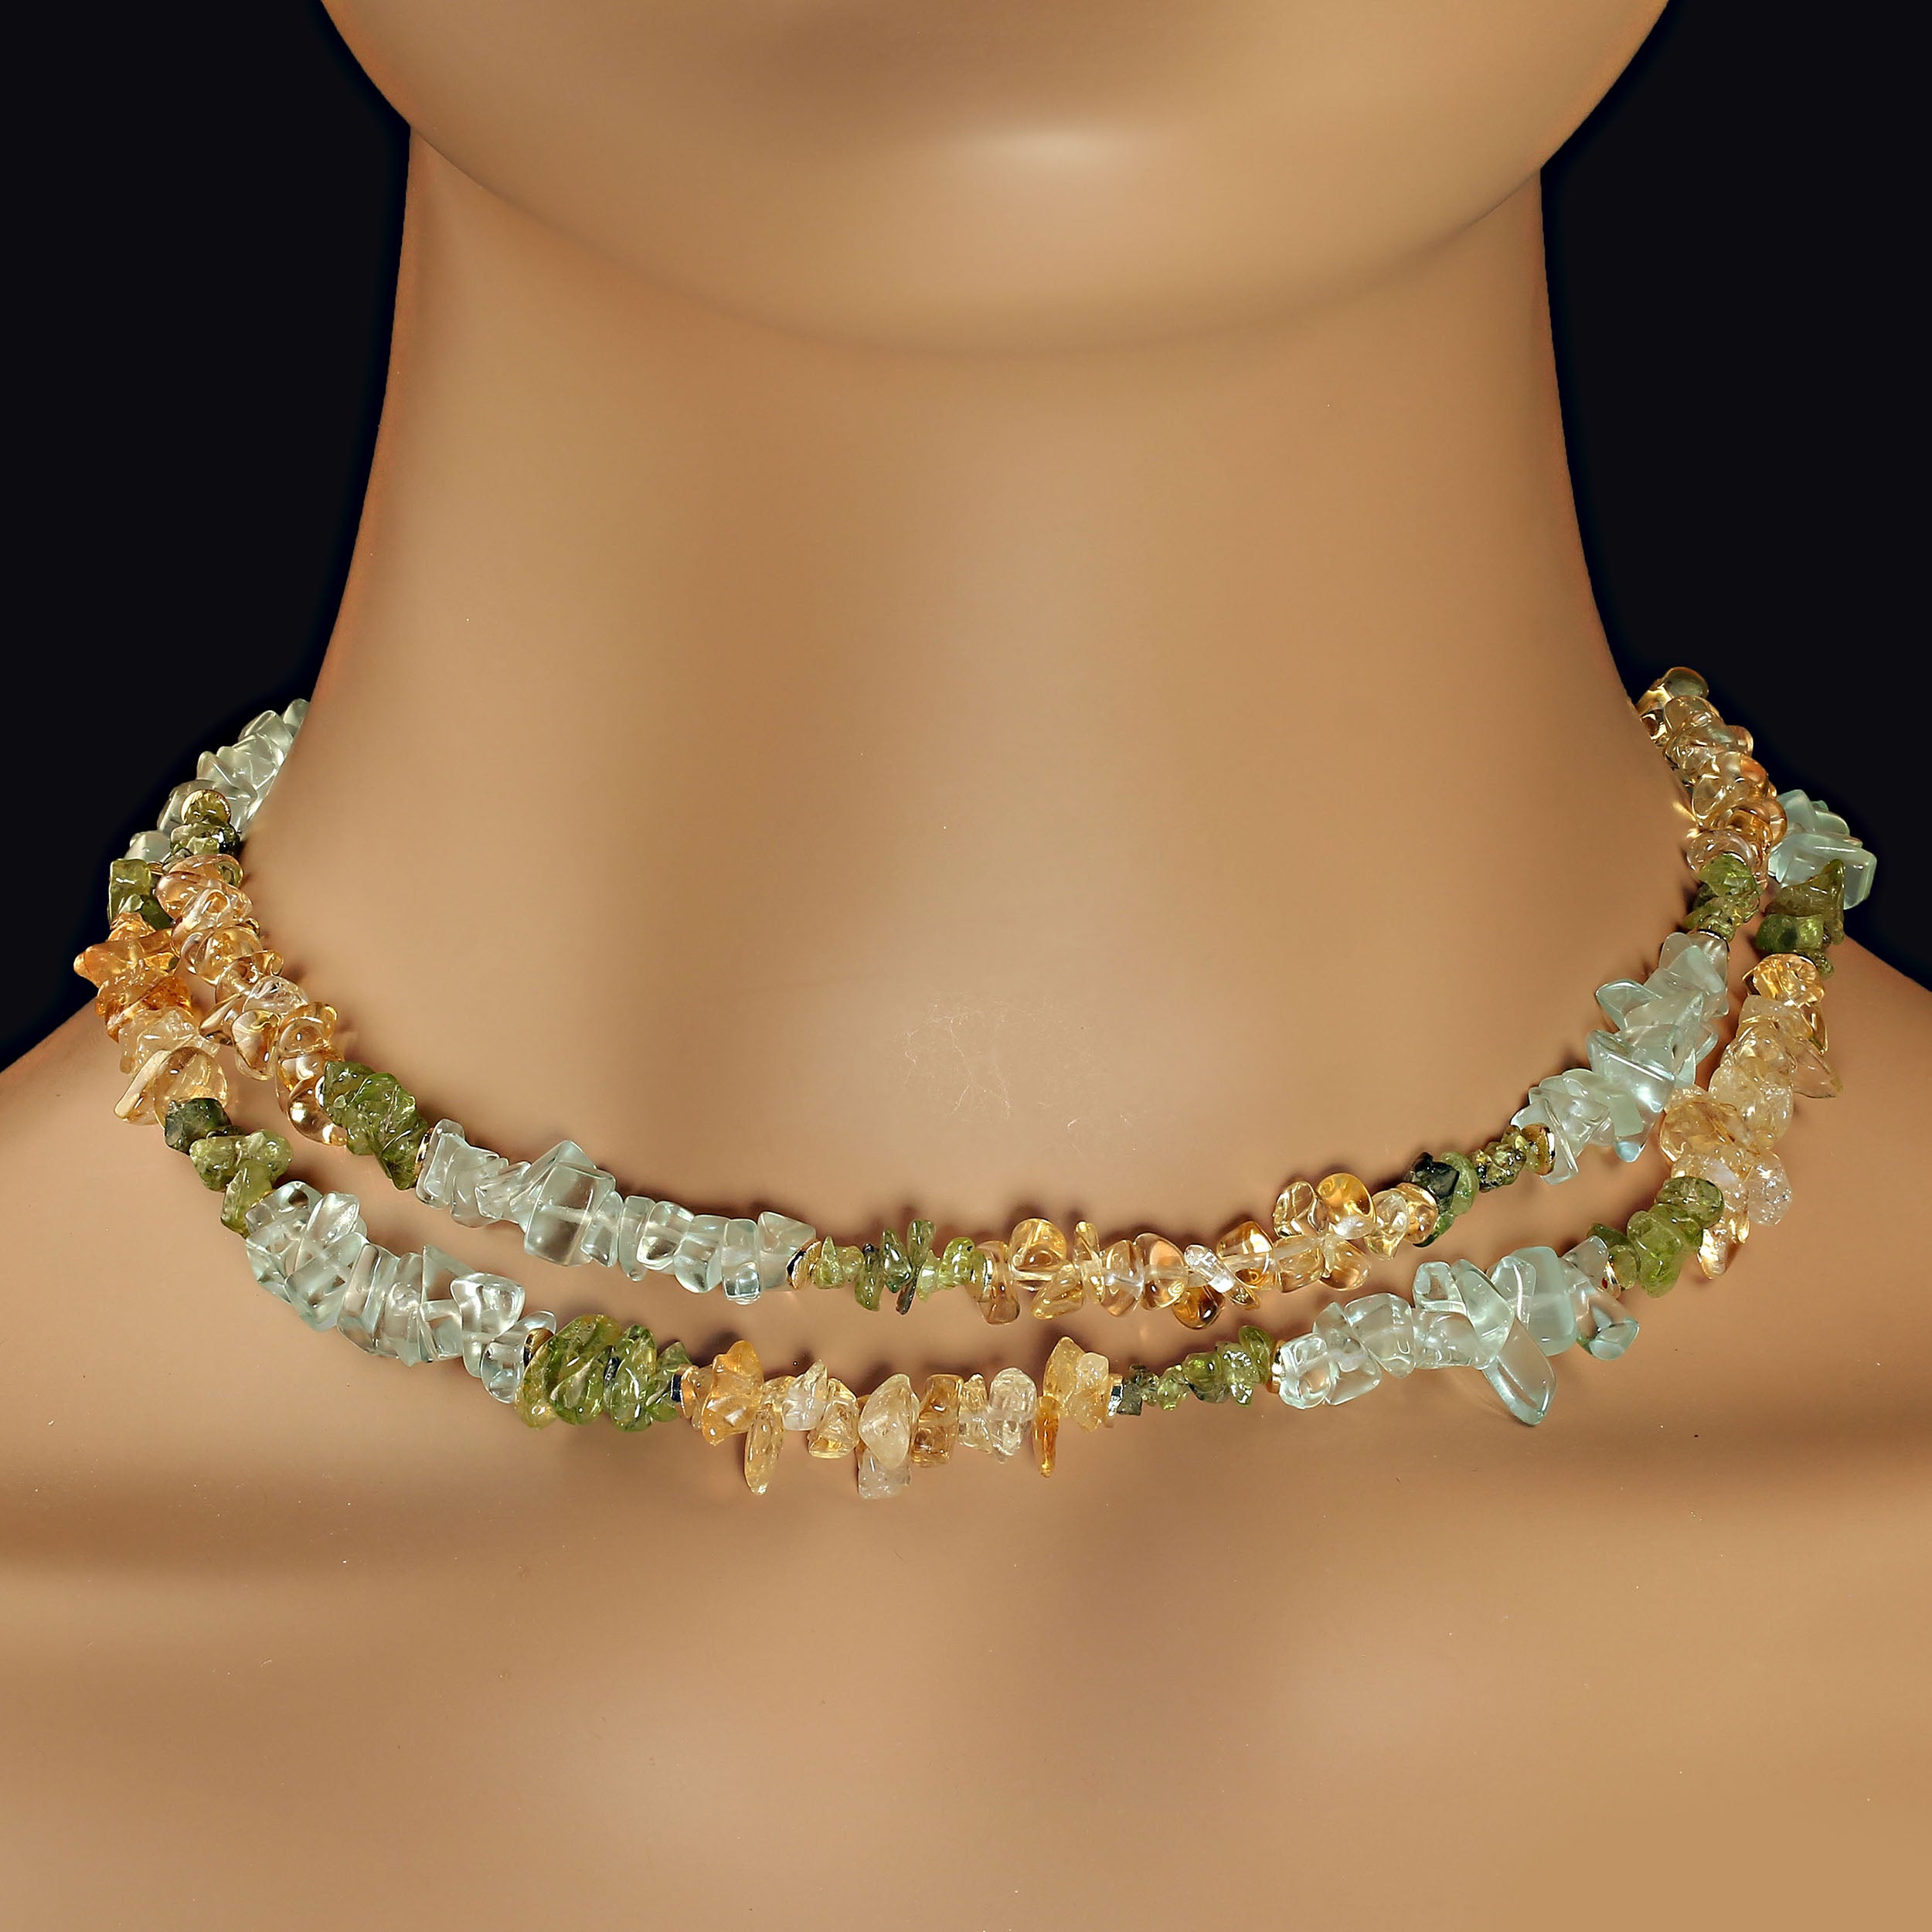 AJD 34 Inch Rope of Highly Polished Chips Citrine, Aquamarine, and Peridot 